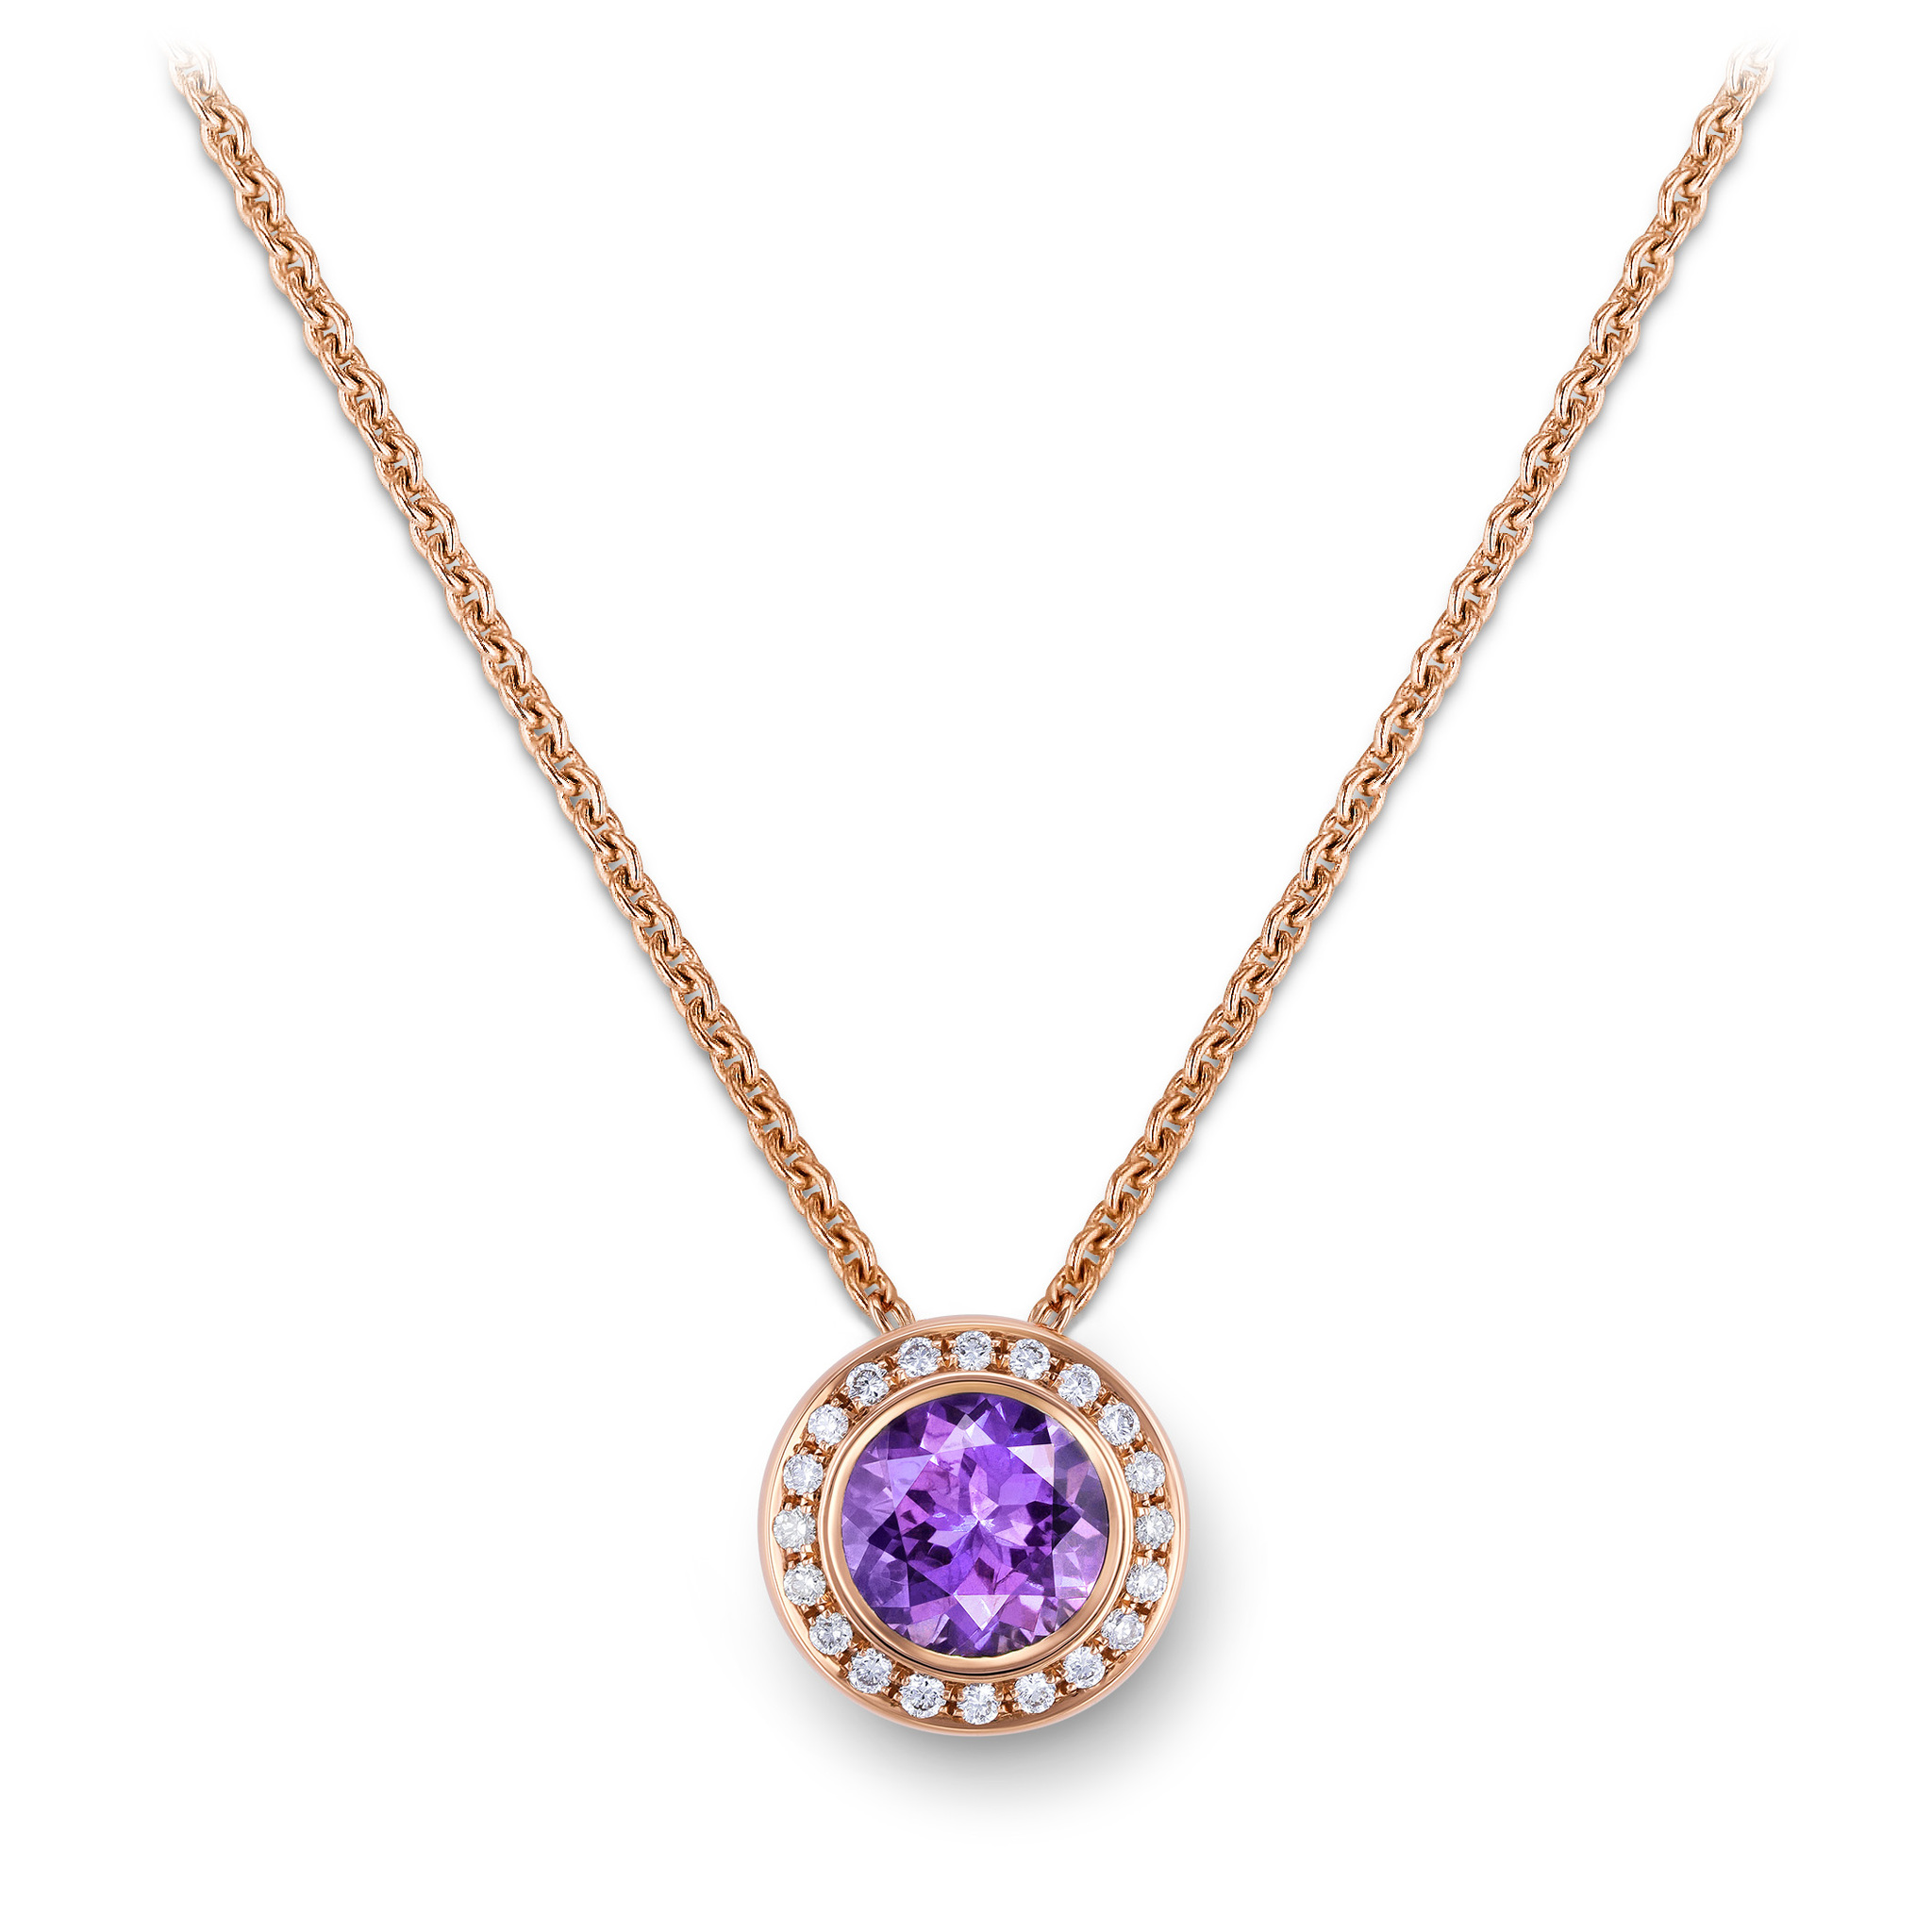 Necklace with amethyst